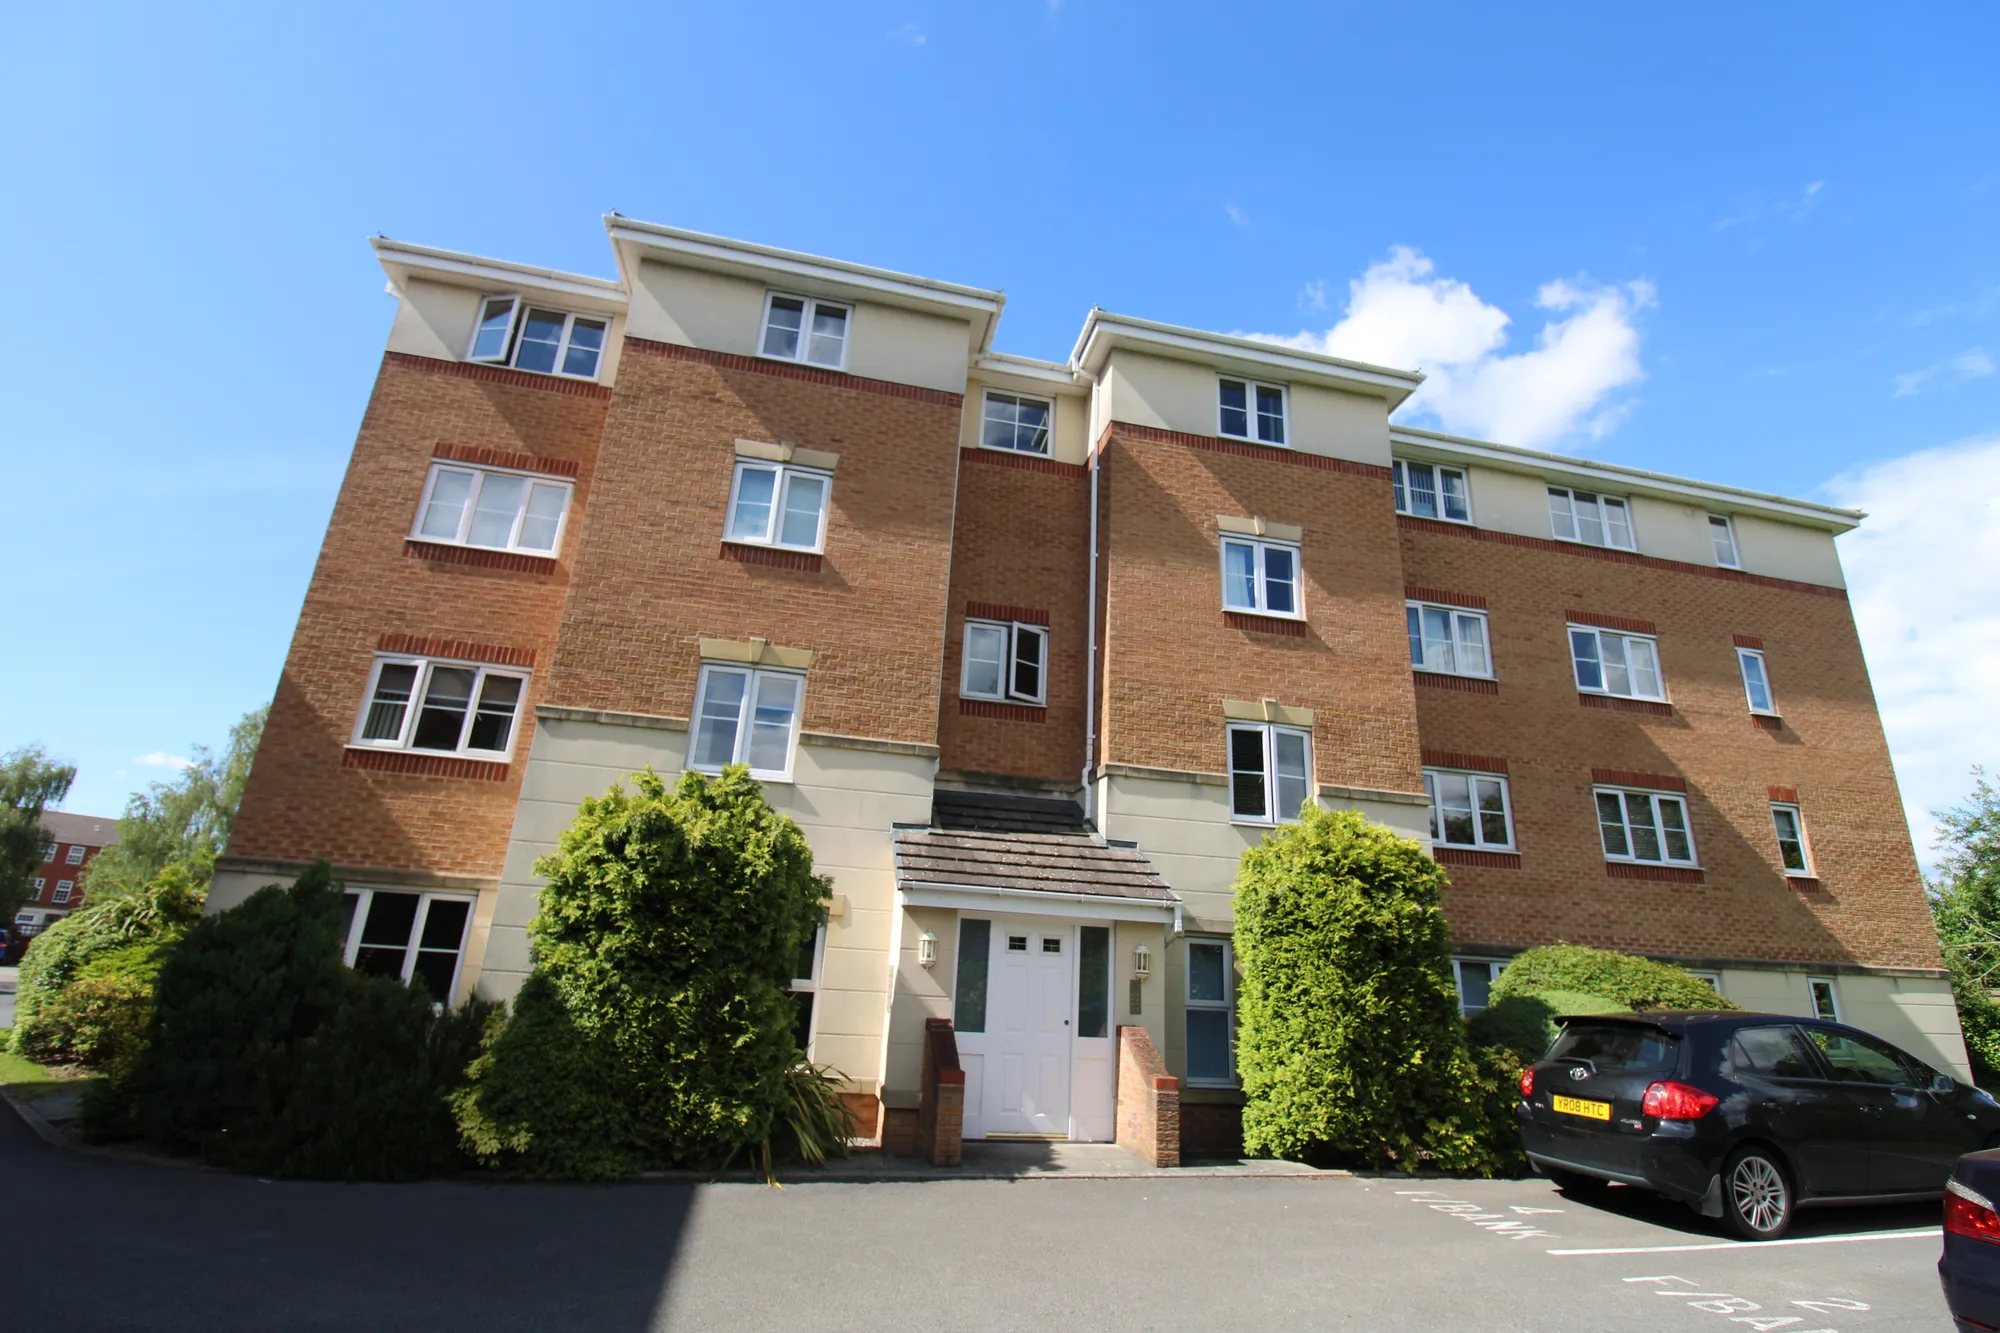 2 bed apartment to rent in Firbank Close, Ashton-Under-Lyne - Property Image 1